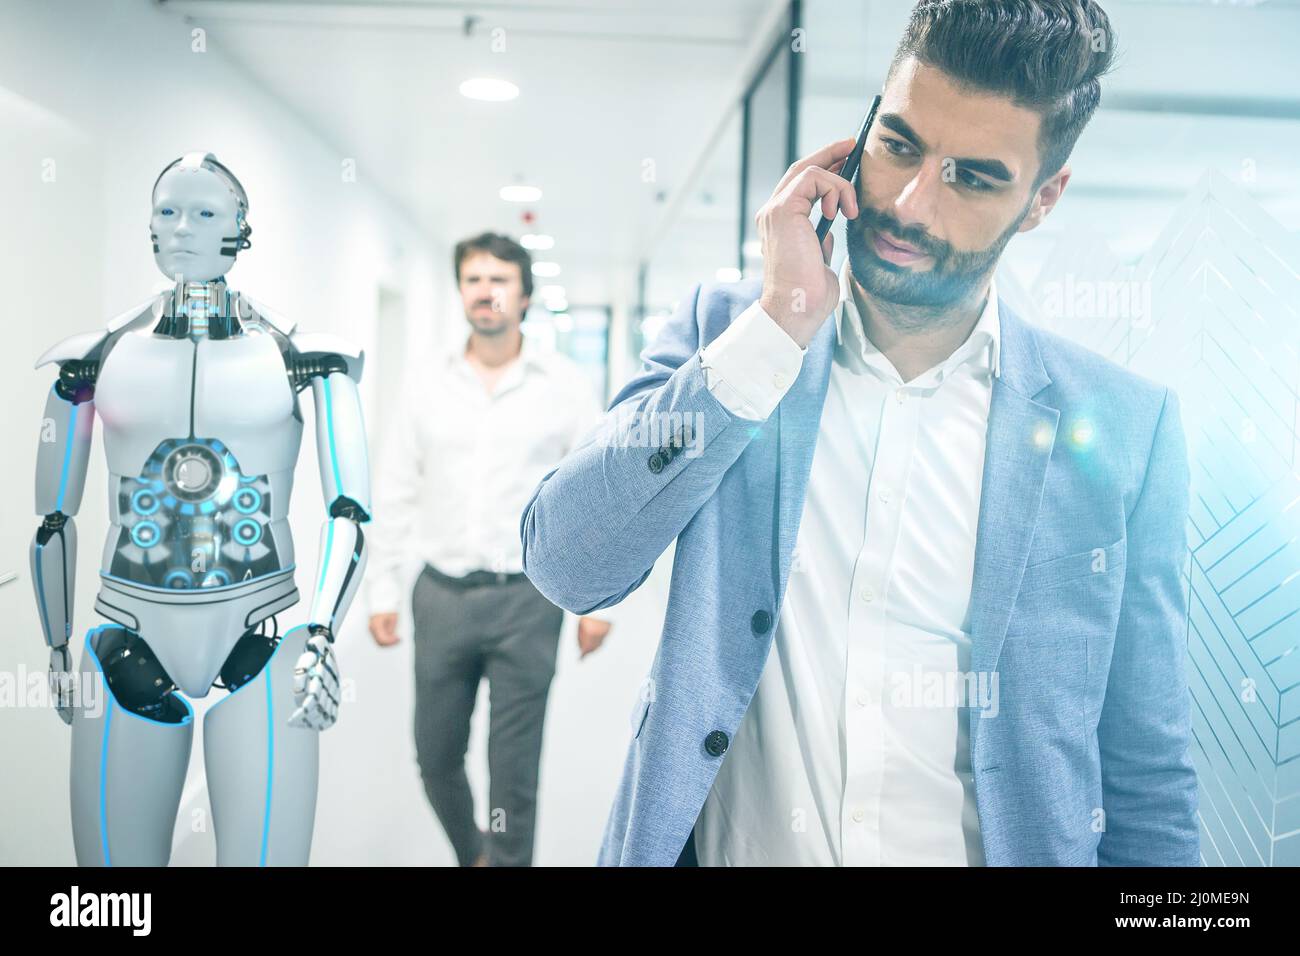 Concept Business 4.0, Robot with business people Stock Photo